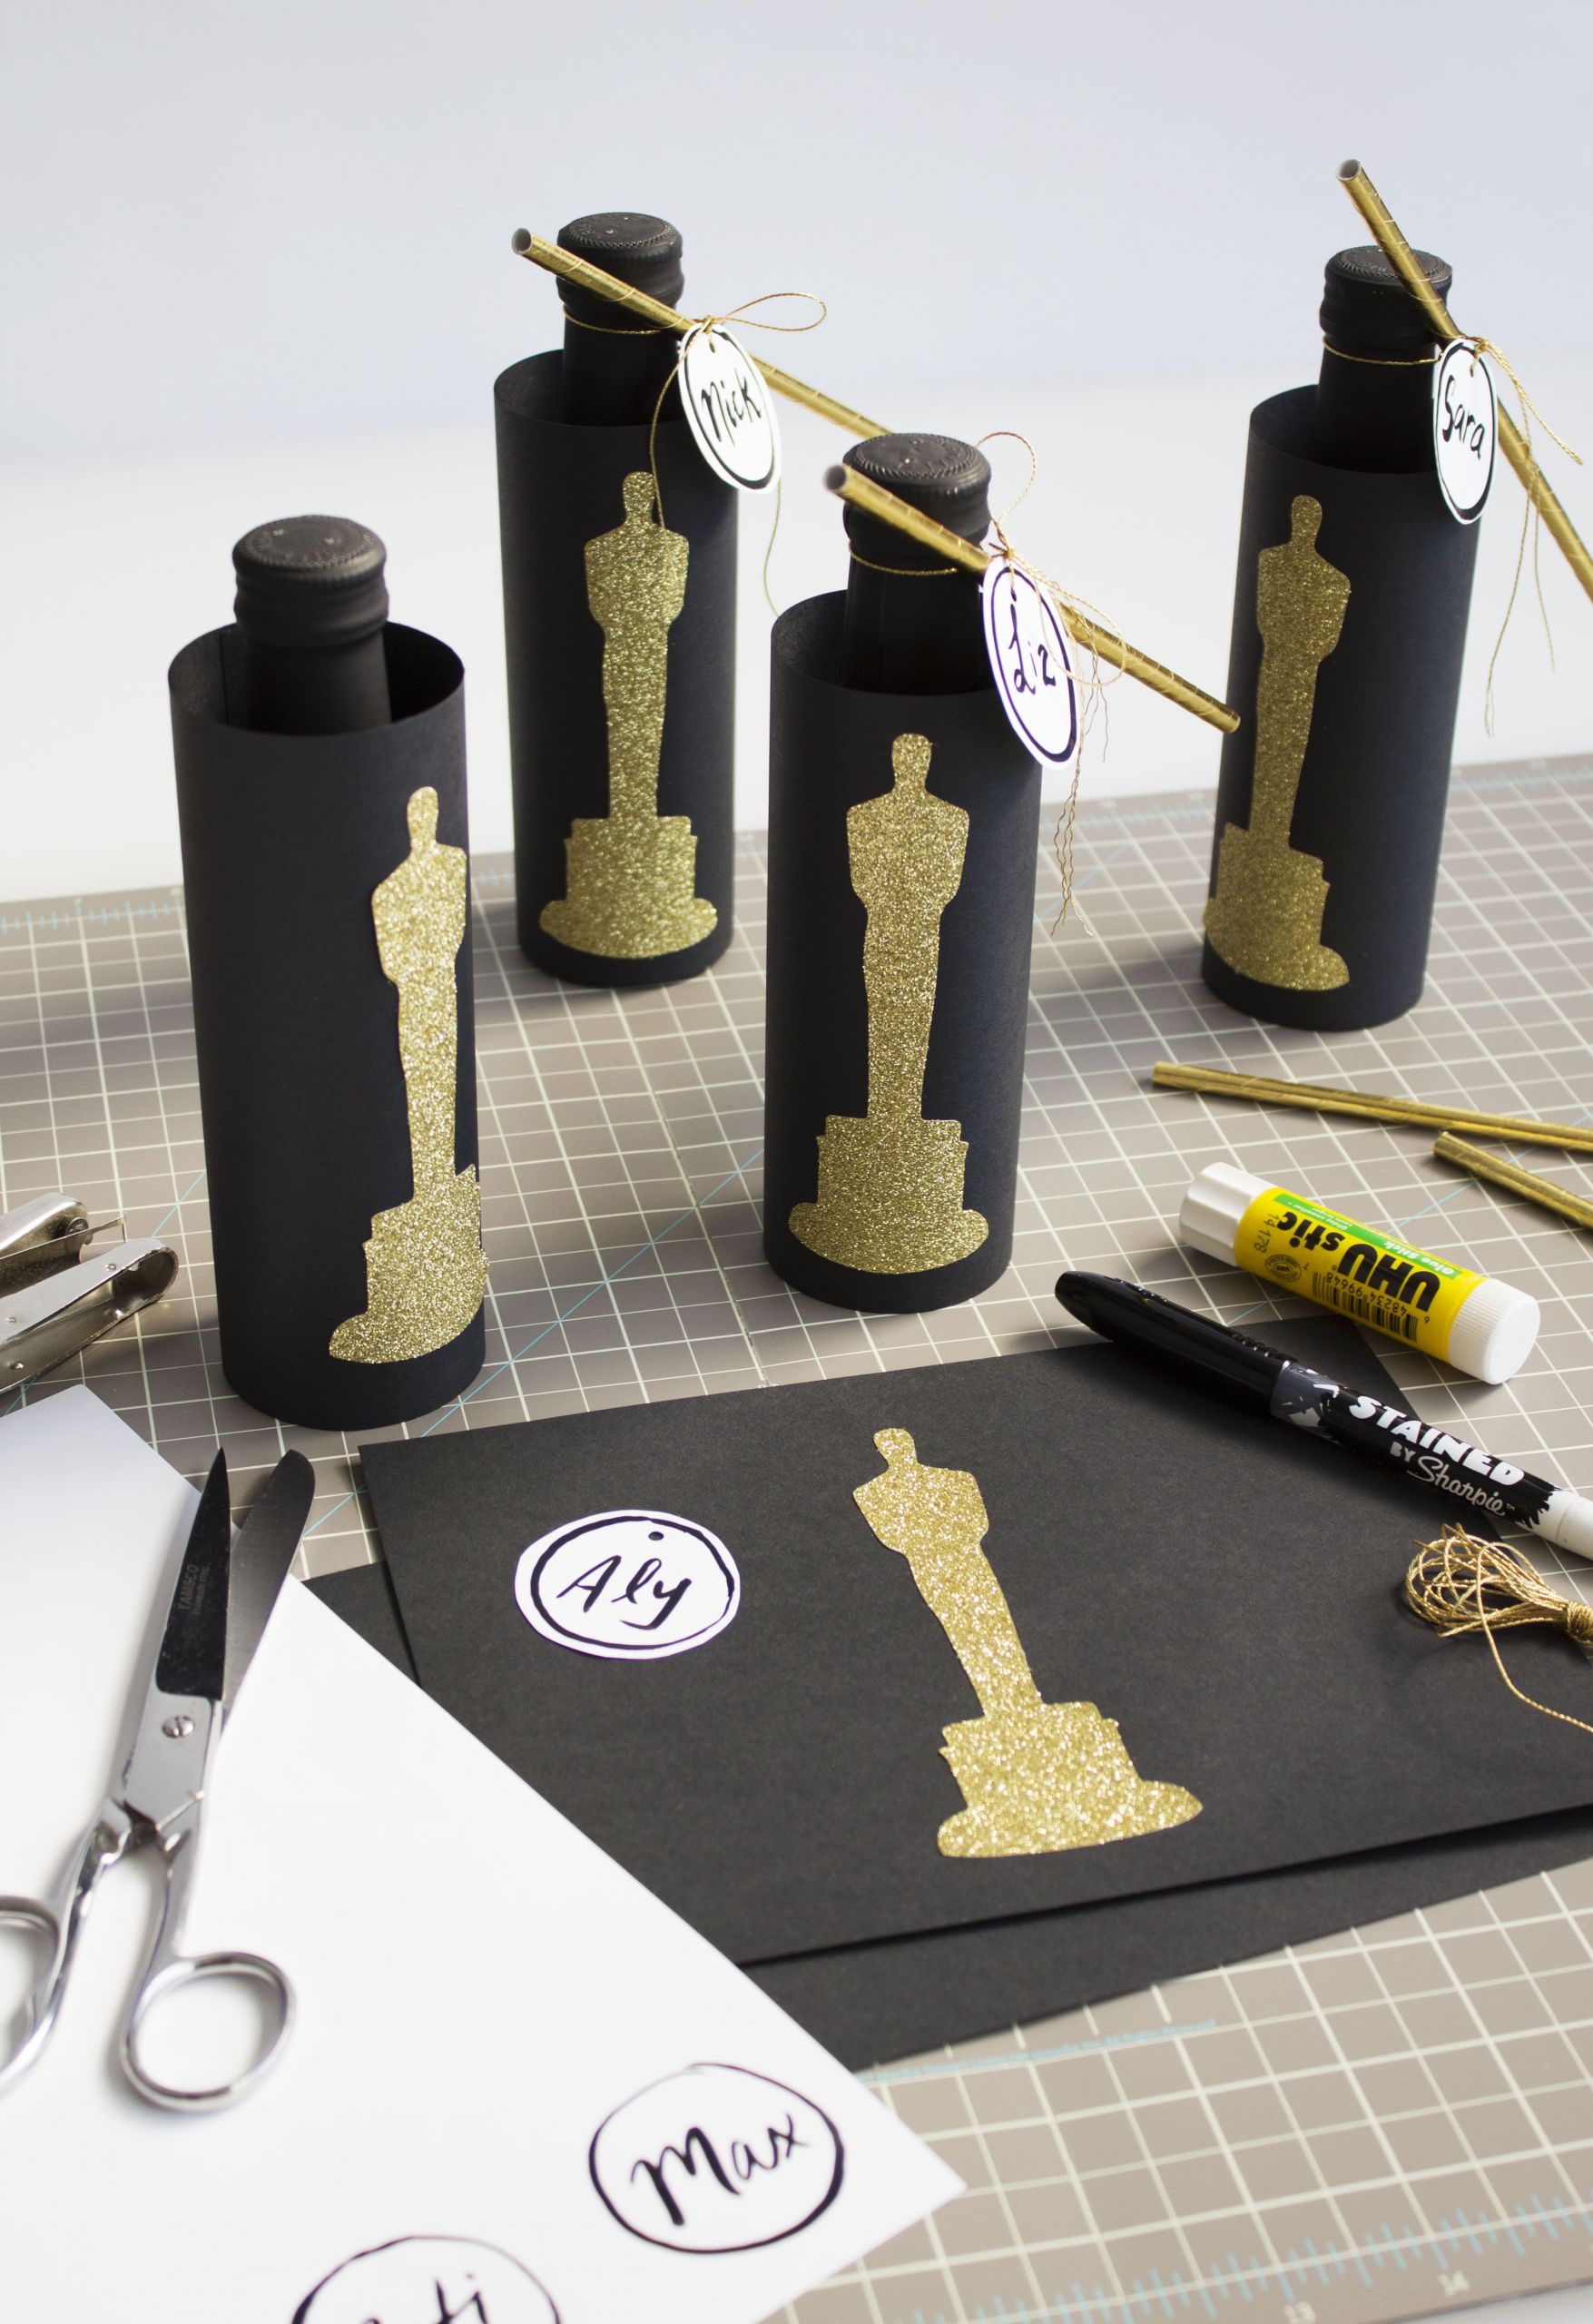 DIY Hollywood Party Decorations
 Four DIY Projects to Make Your Oscar Party Ultra Fabulous